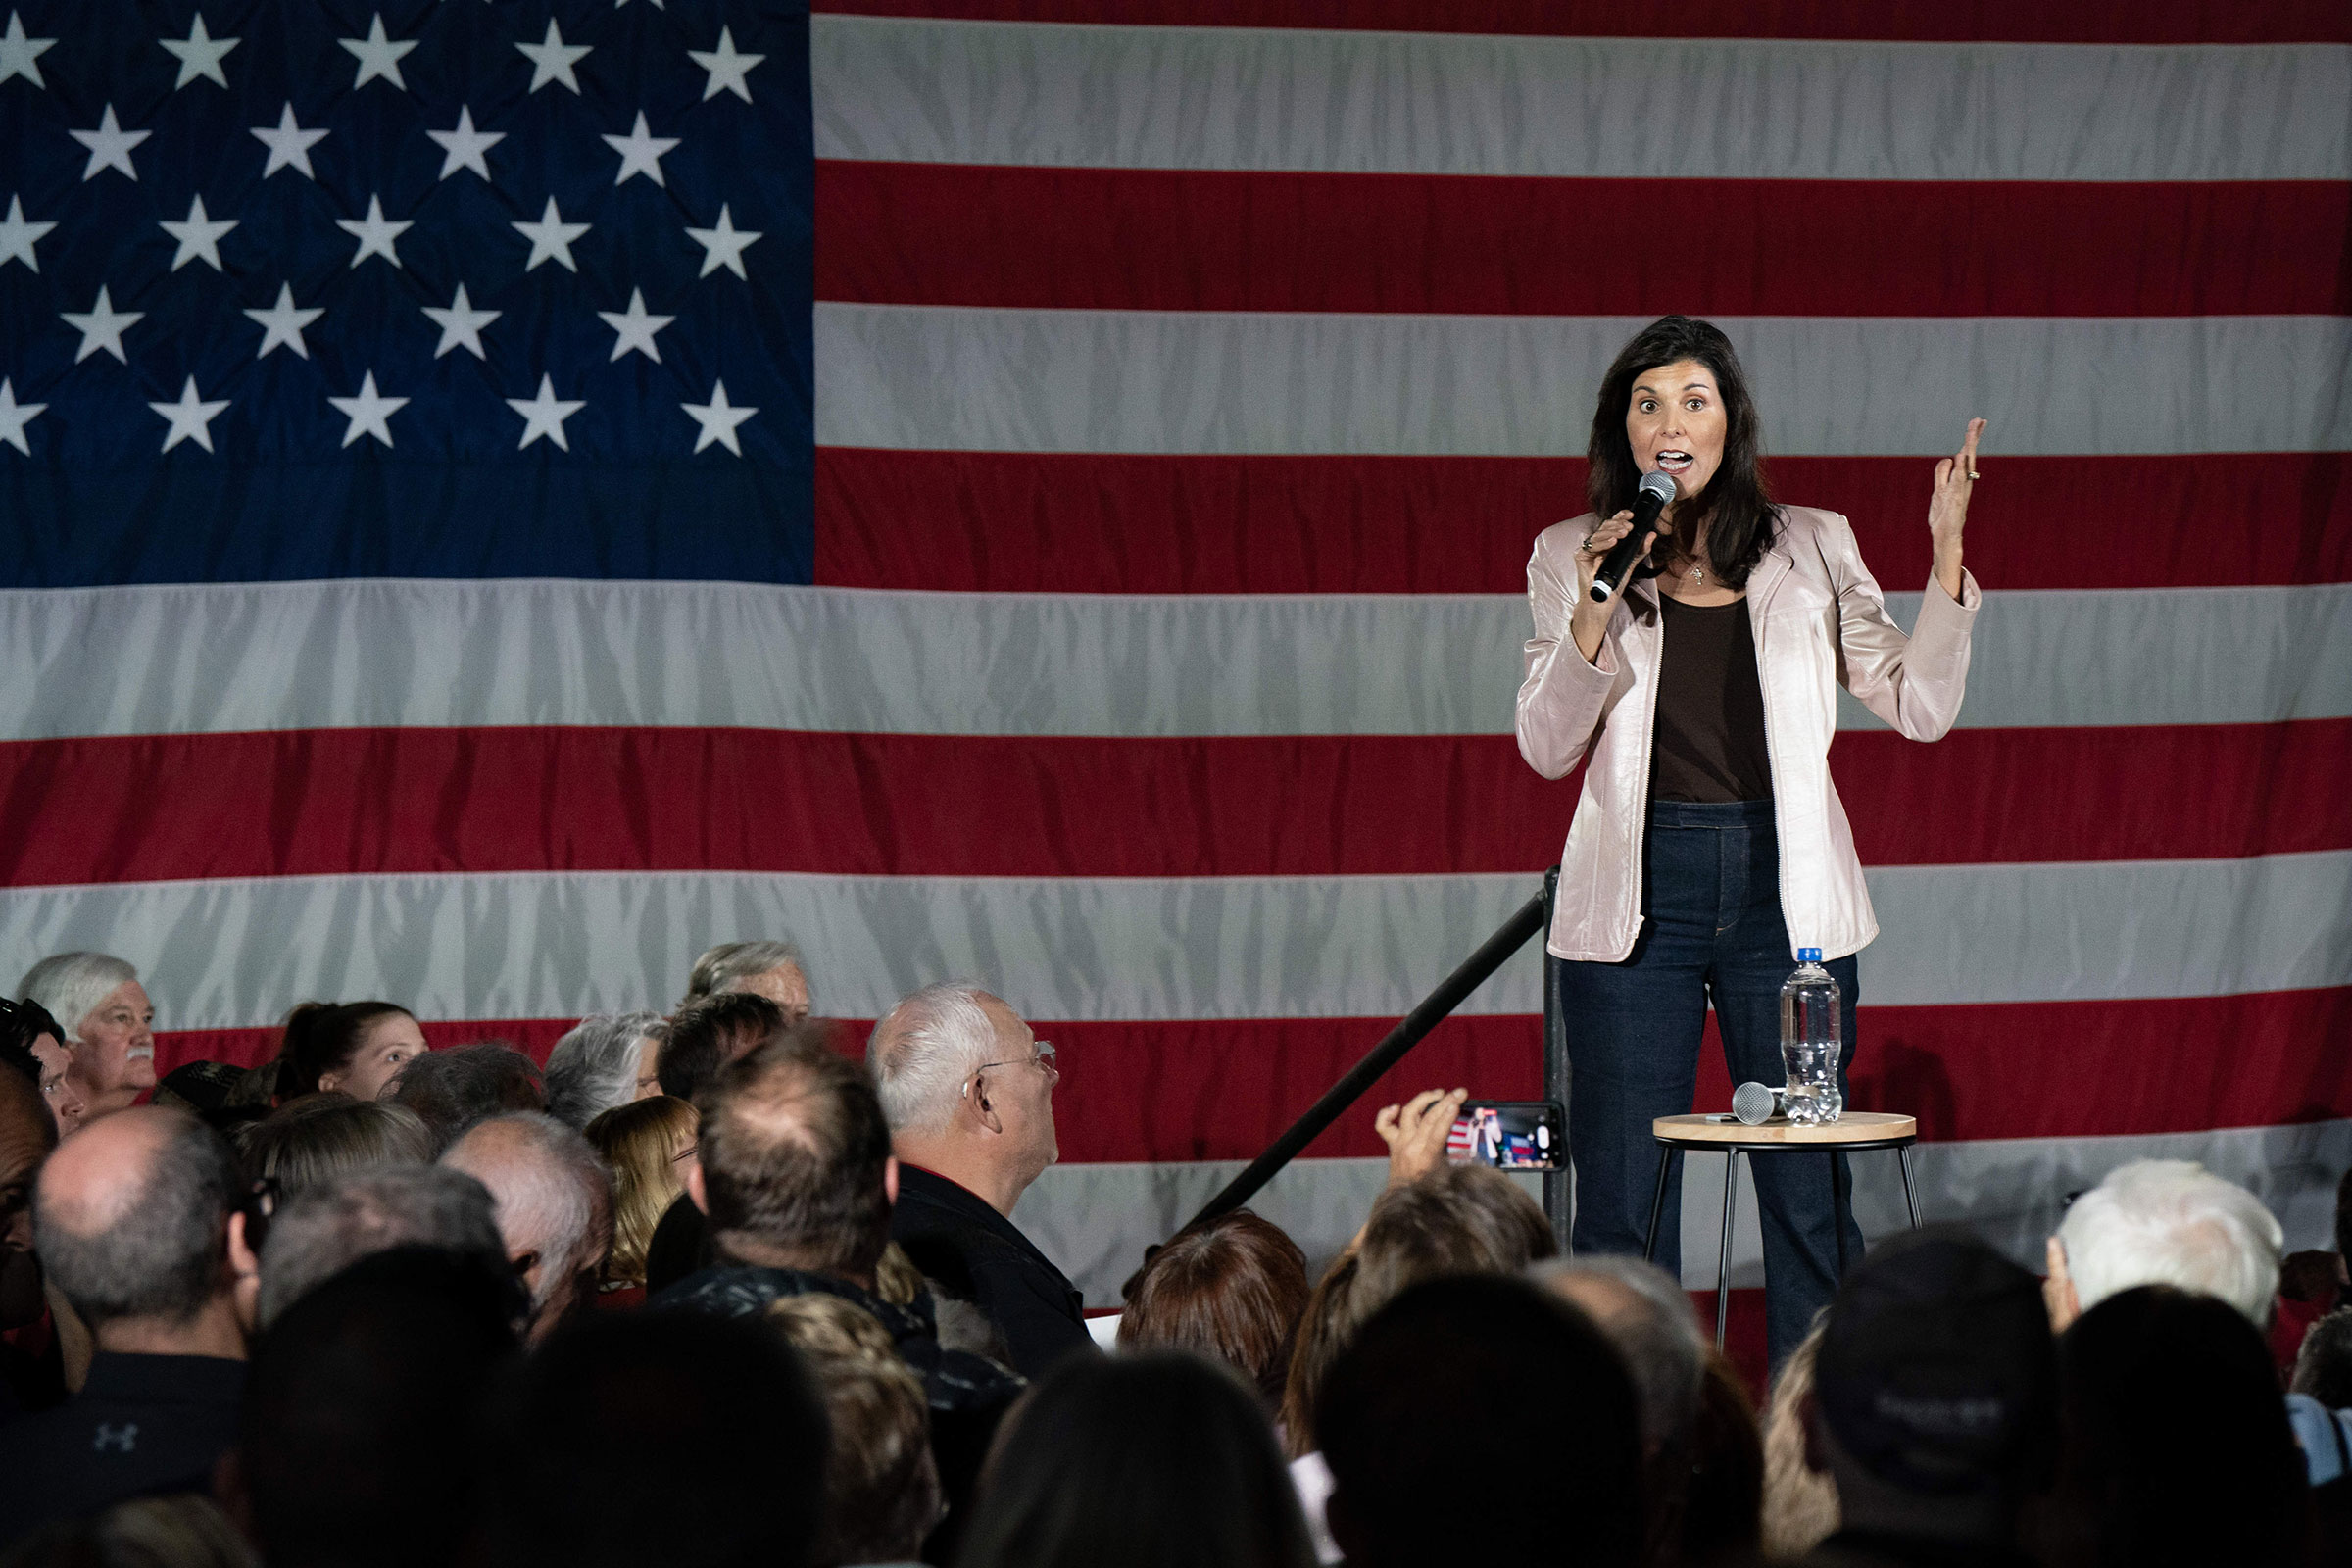 Nikki Haley speaks during a campaign event at Horry-Georgetown Technical College in S.C., on March 13, 2023.